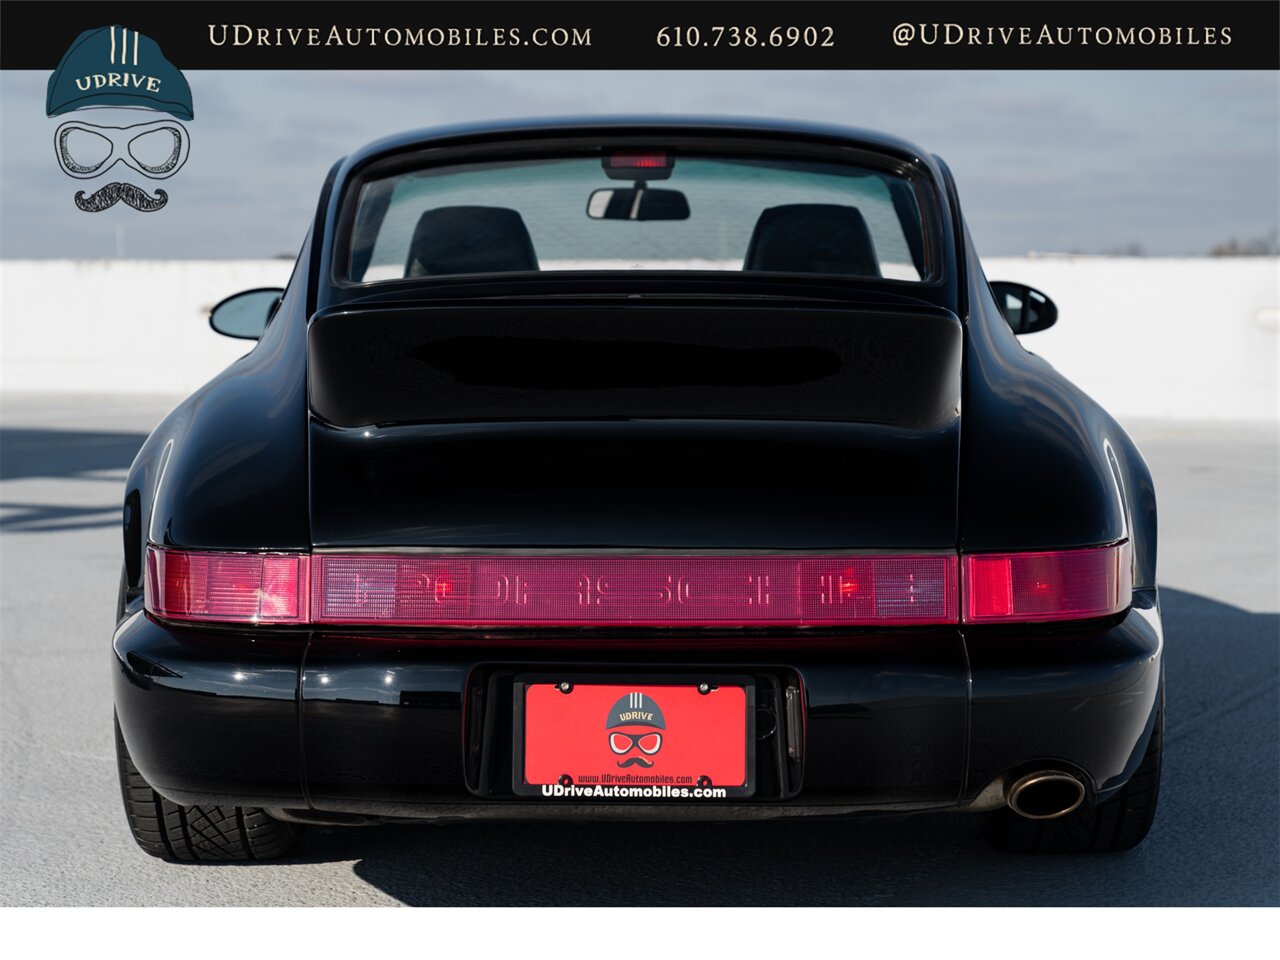 1989 Porsche 911 C4  964 Carrera 4 C4 5 Speed Manual $33k in Recent Service History - Photo 22 - West Chester, PA 19382